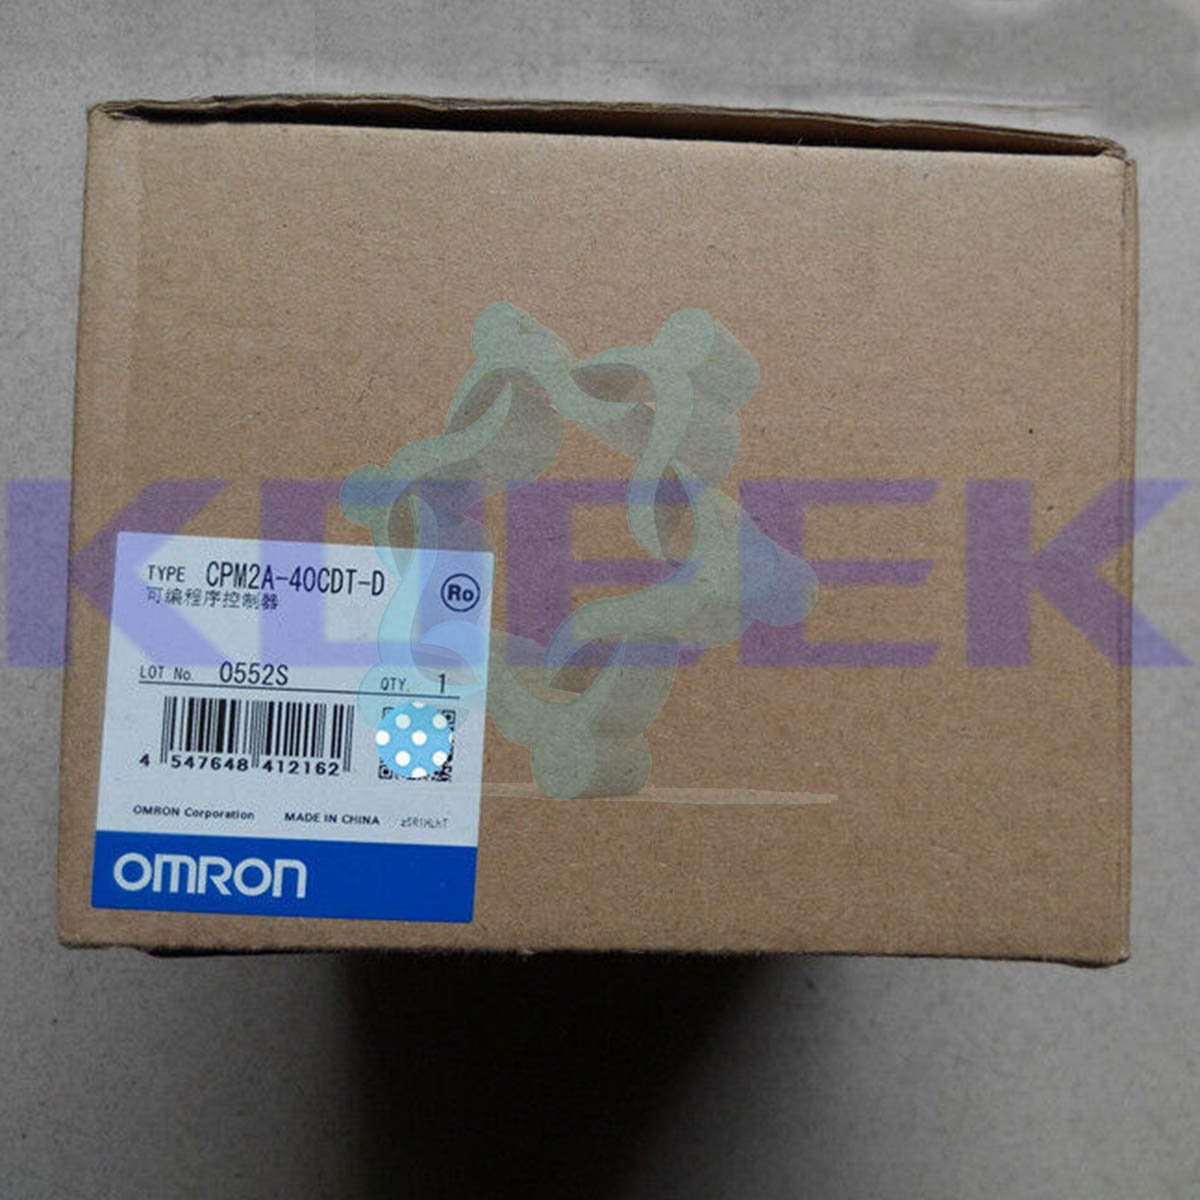 CPM2A-40CDT-D KOEED 101-200, 80%, import_2020_10_10_031751, Omron, Other